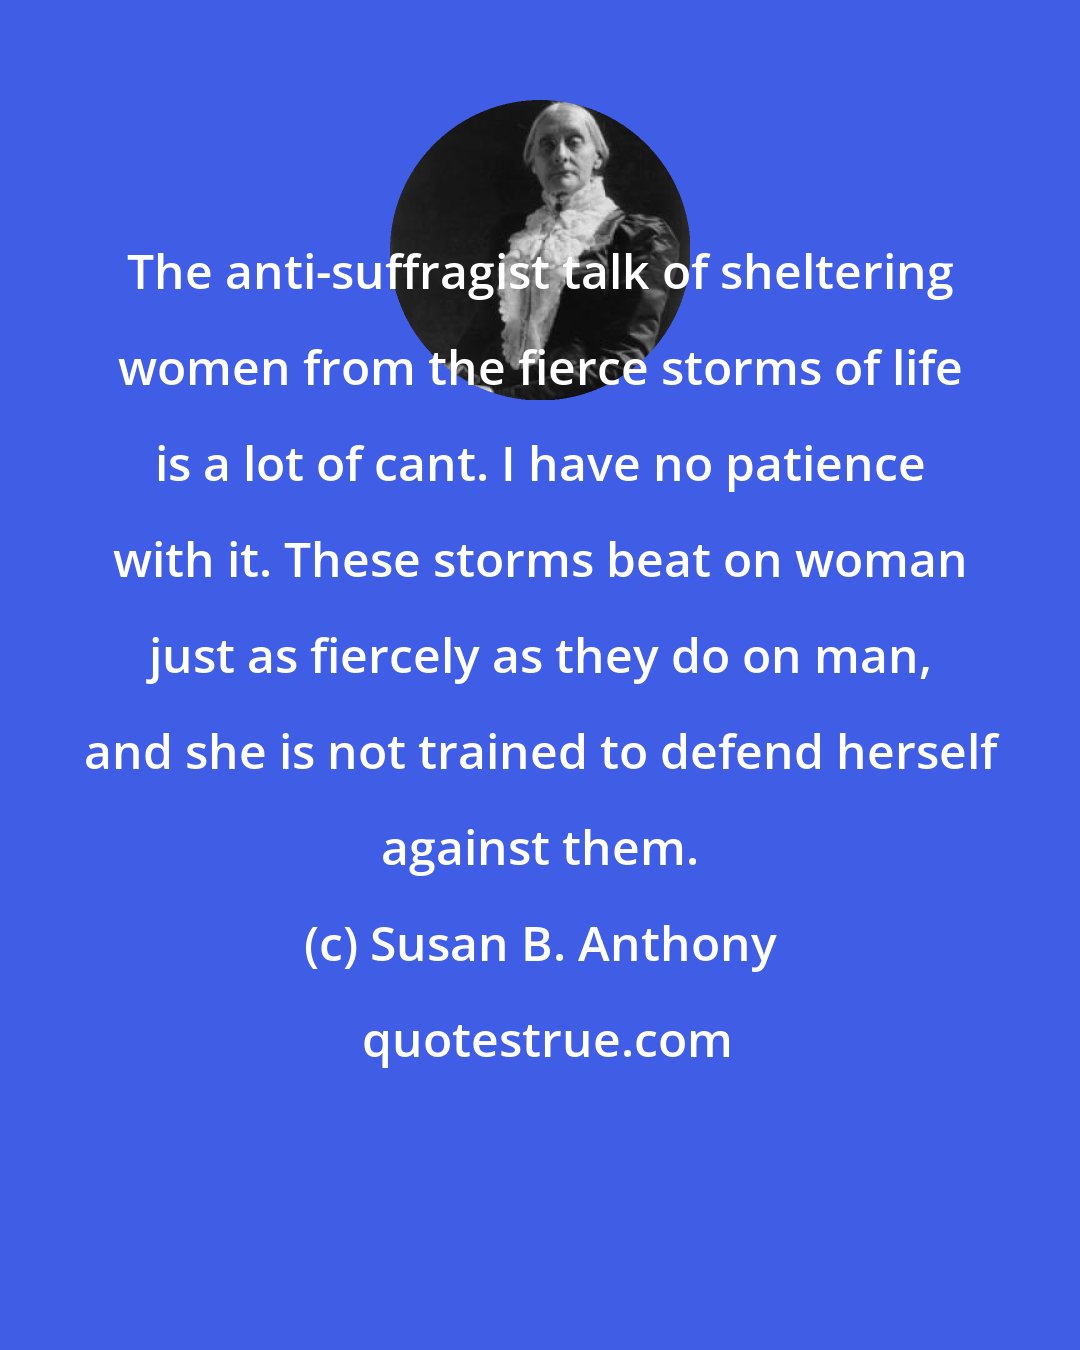 Susan B. Anthony: The anti-suffragist talk of sheltering women from the fierce storms of life is a lot of cant. I have no patience with it. These storms beat on woman just as fiercely as they do on man, and she is not trained to defend herself against them.